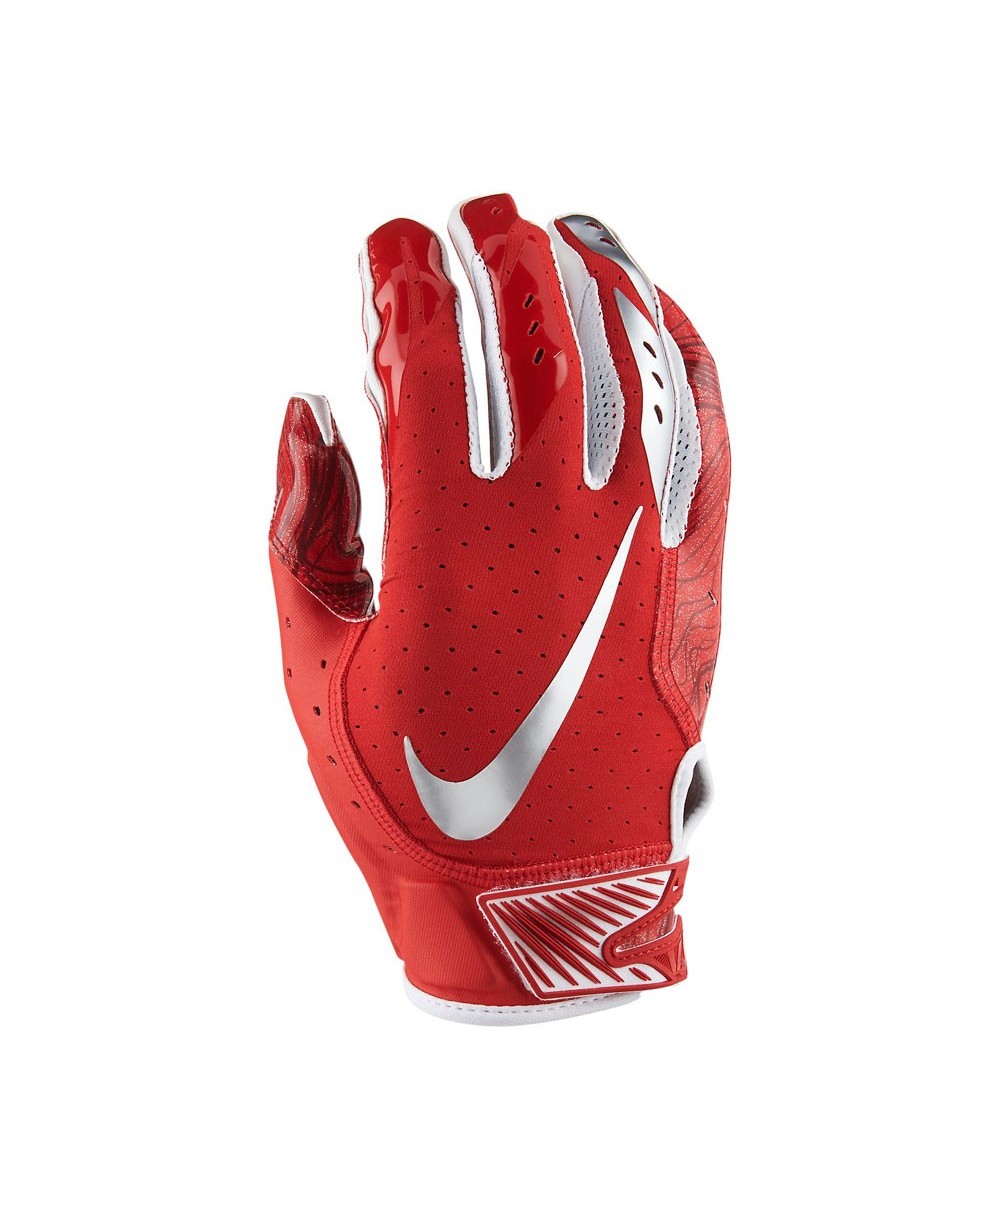 all red nike gloves